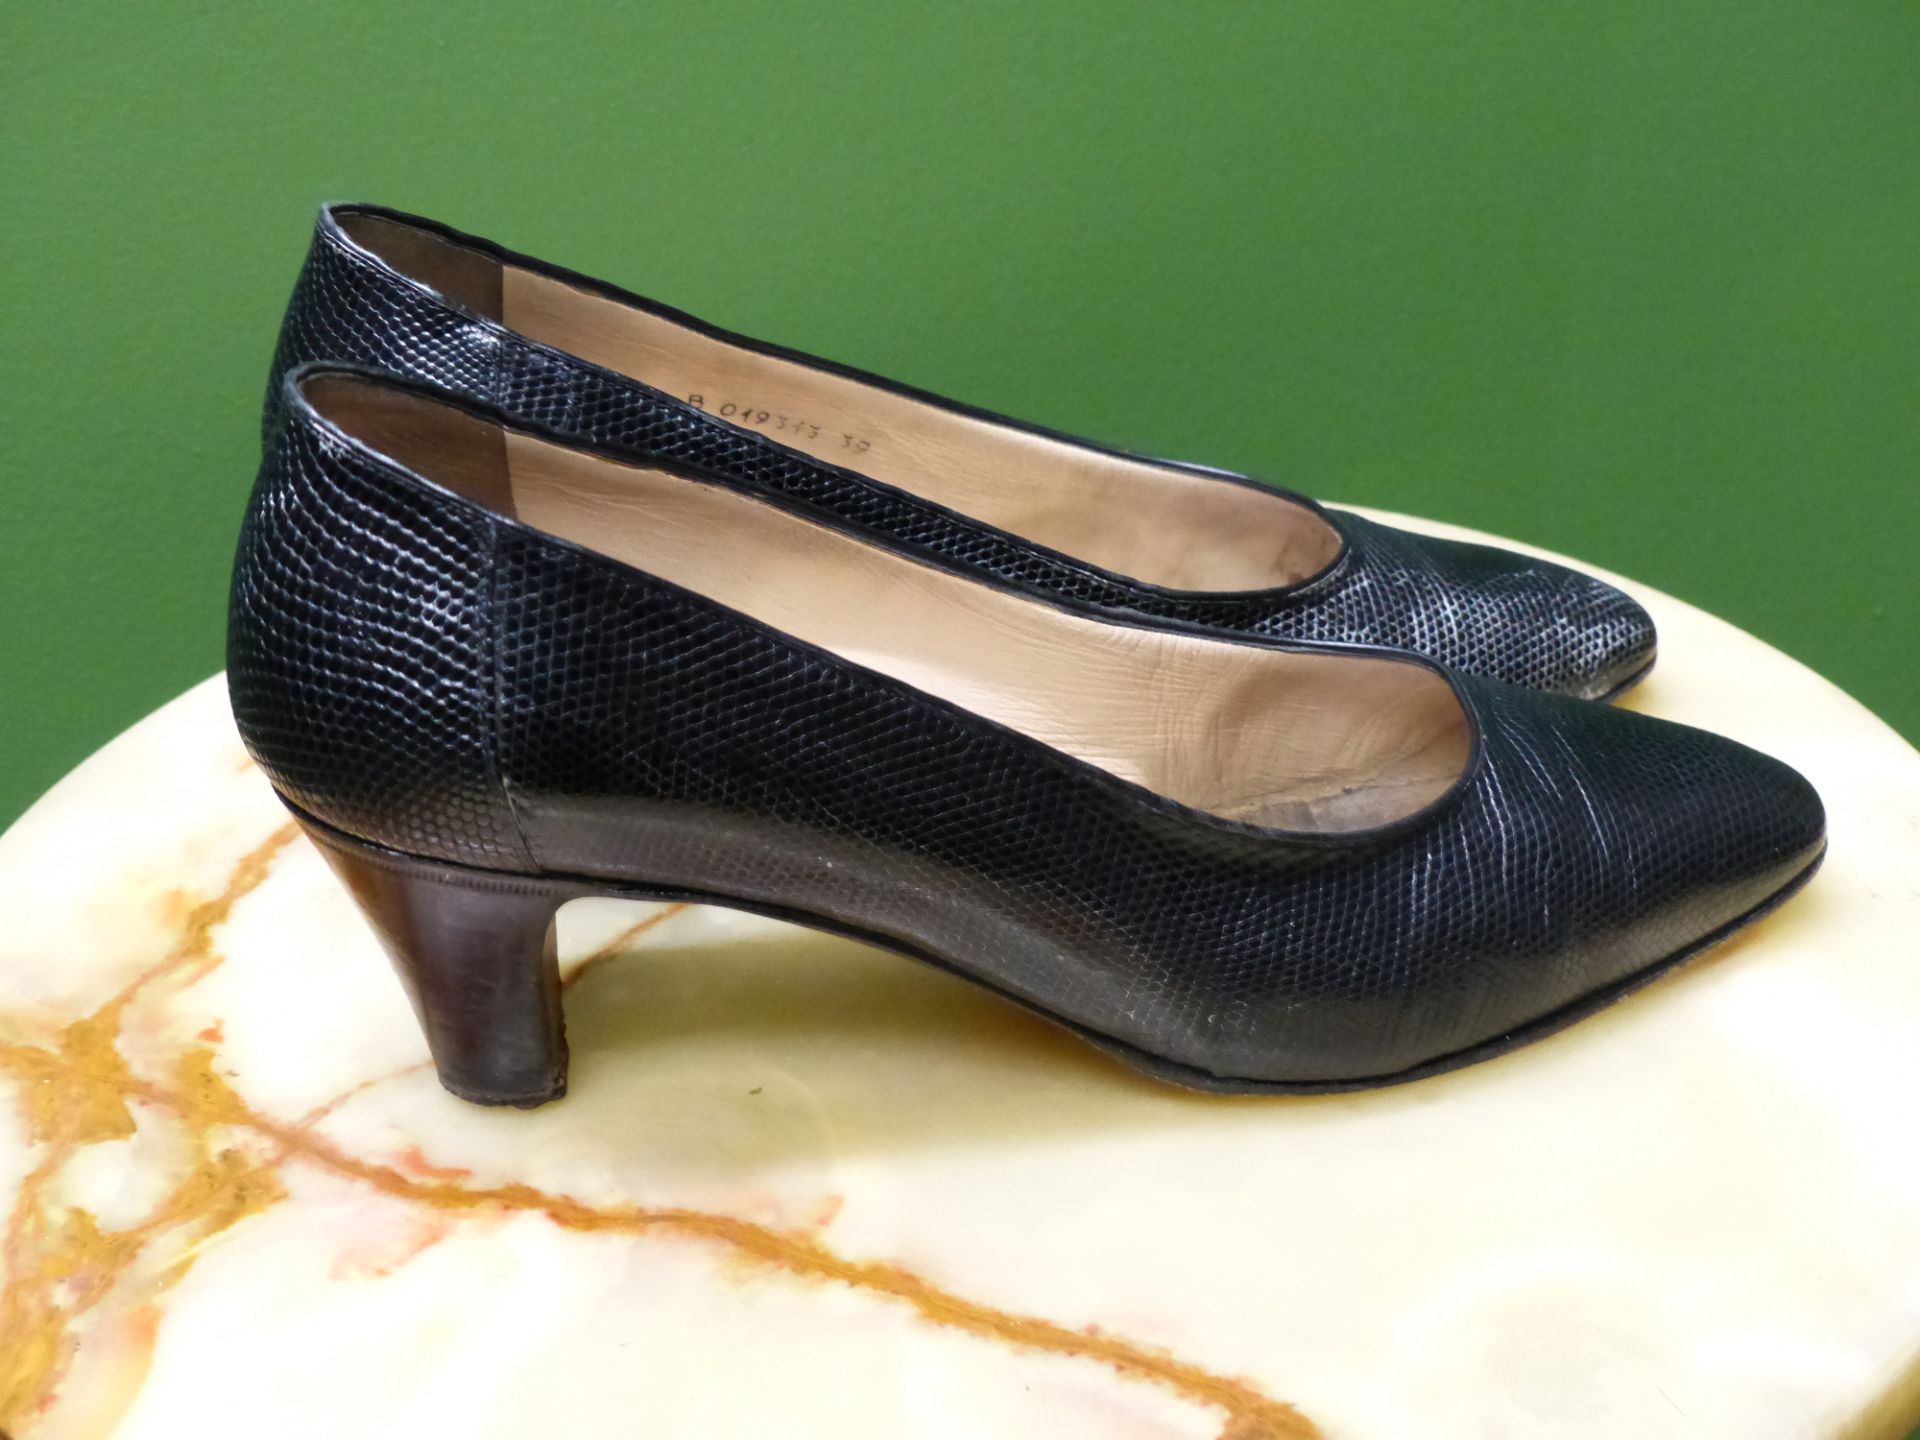 SHOES. TWO PAIRS TANINO CRISCI BLACK HEALS EUR SIZE 39. BLACK LOAFERS EUR SIZE 39. - Image 9 of 11